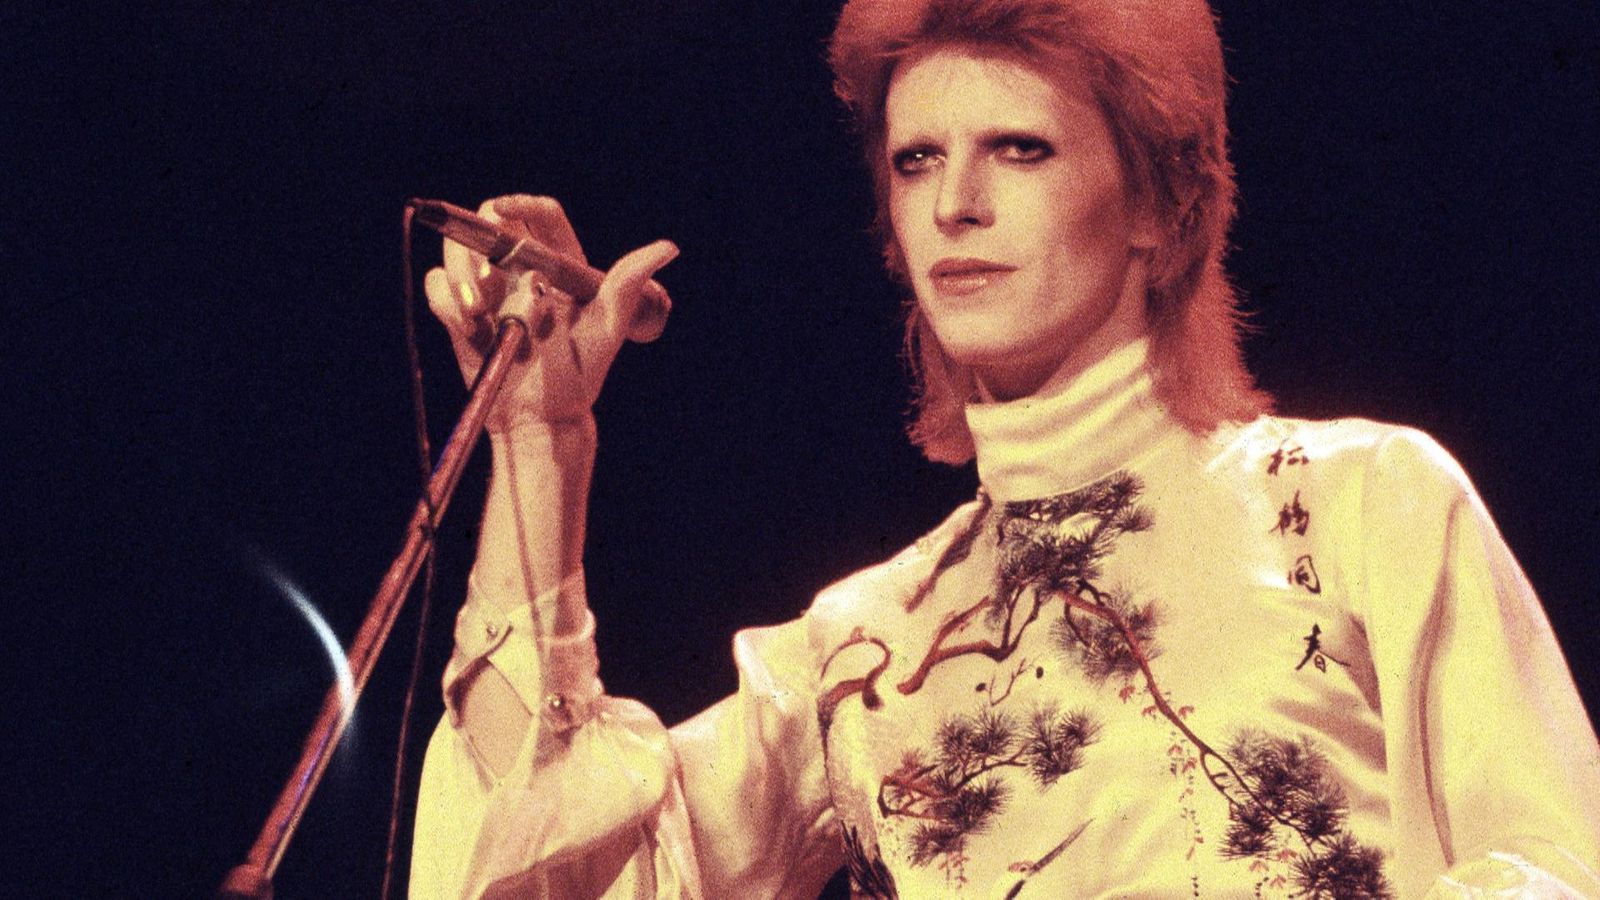 David Bowie named Britain’s most influential artist of past half-century | Ents & Arts News